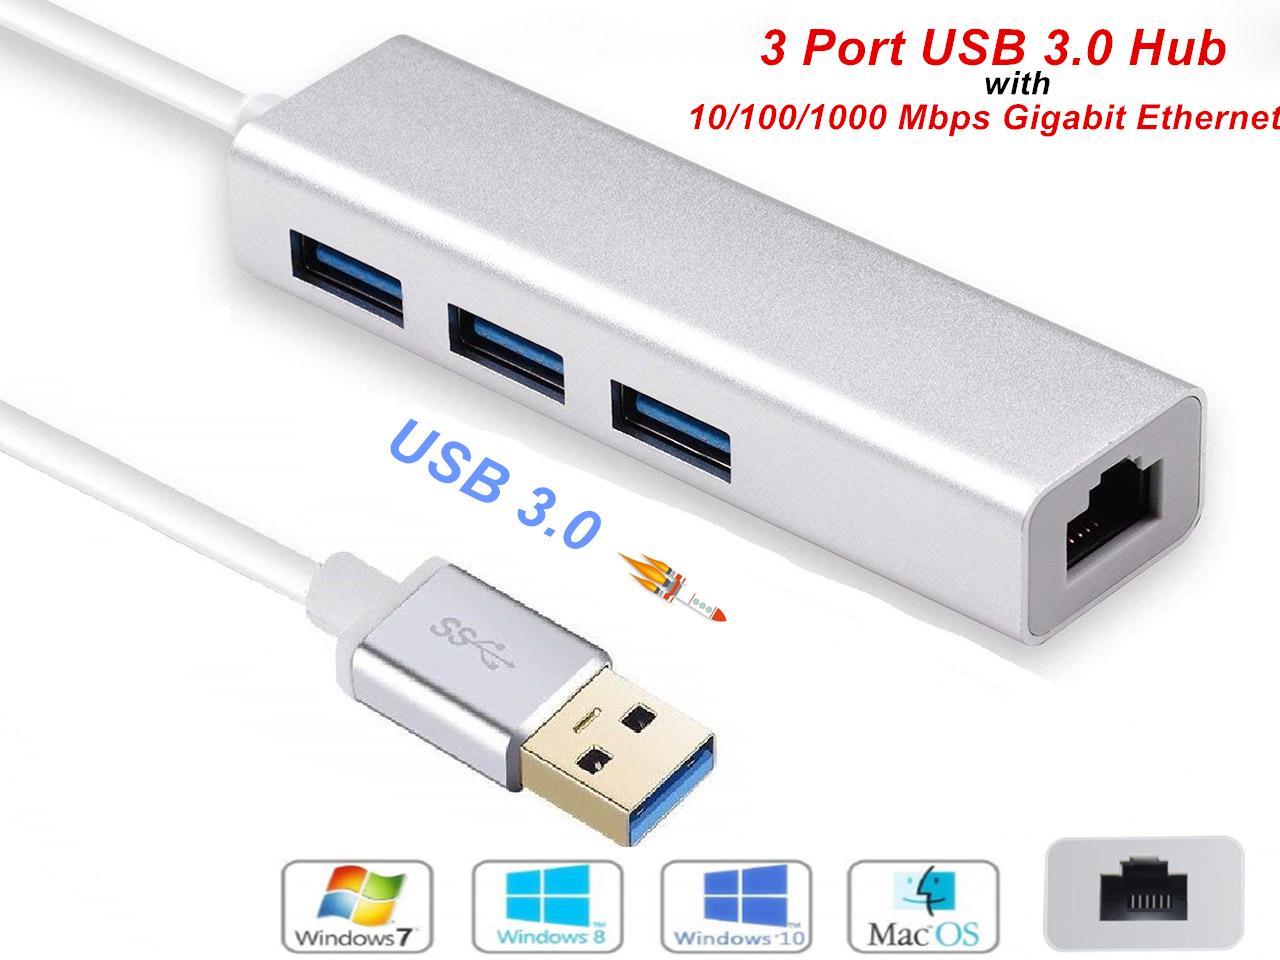 USB HUB 3.0 5Gbpsspeed 7 Ports HUB USB Splitter Pc Extension Aluminum Hub with Round Stand with LED Indicate for MacBook/Ipad/Laptop Tablet